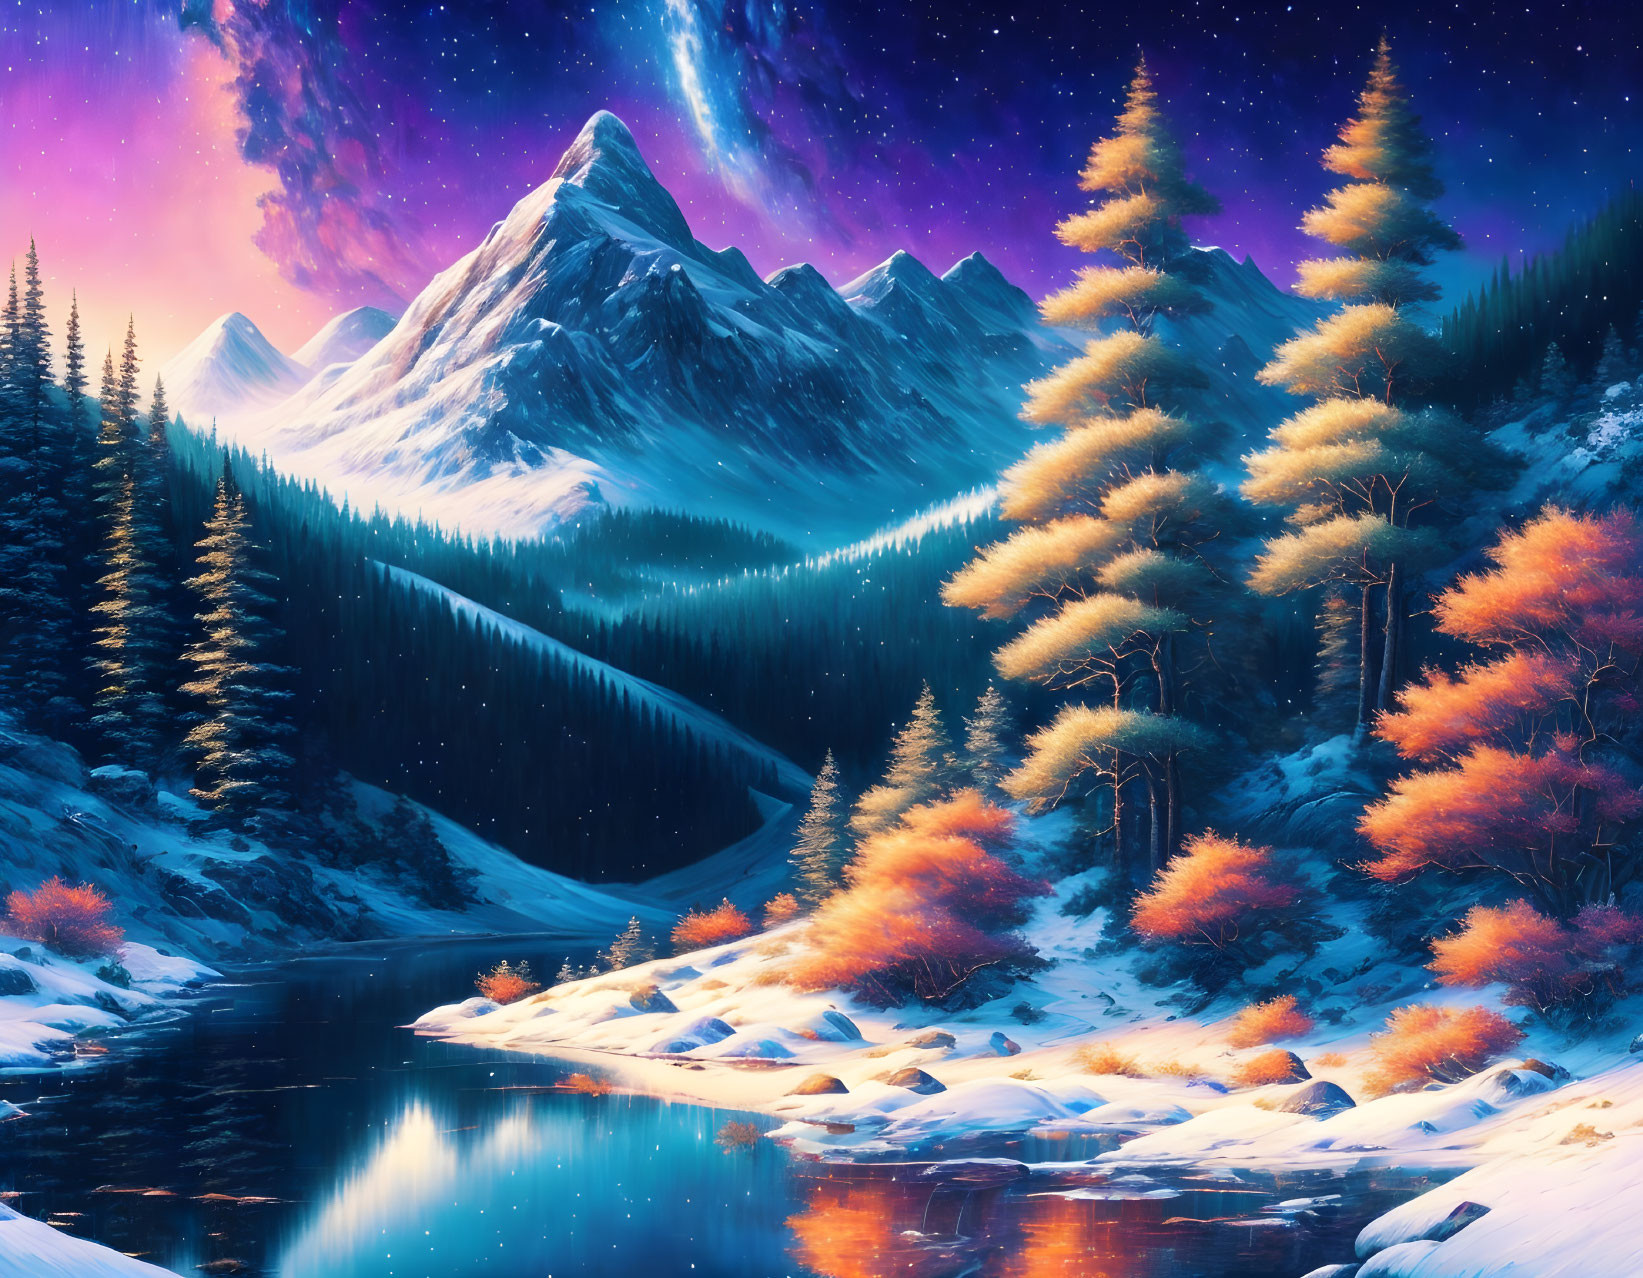 Majestic mountain landscape at twilight with river, pine trees, and starry sky